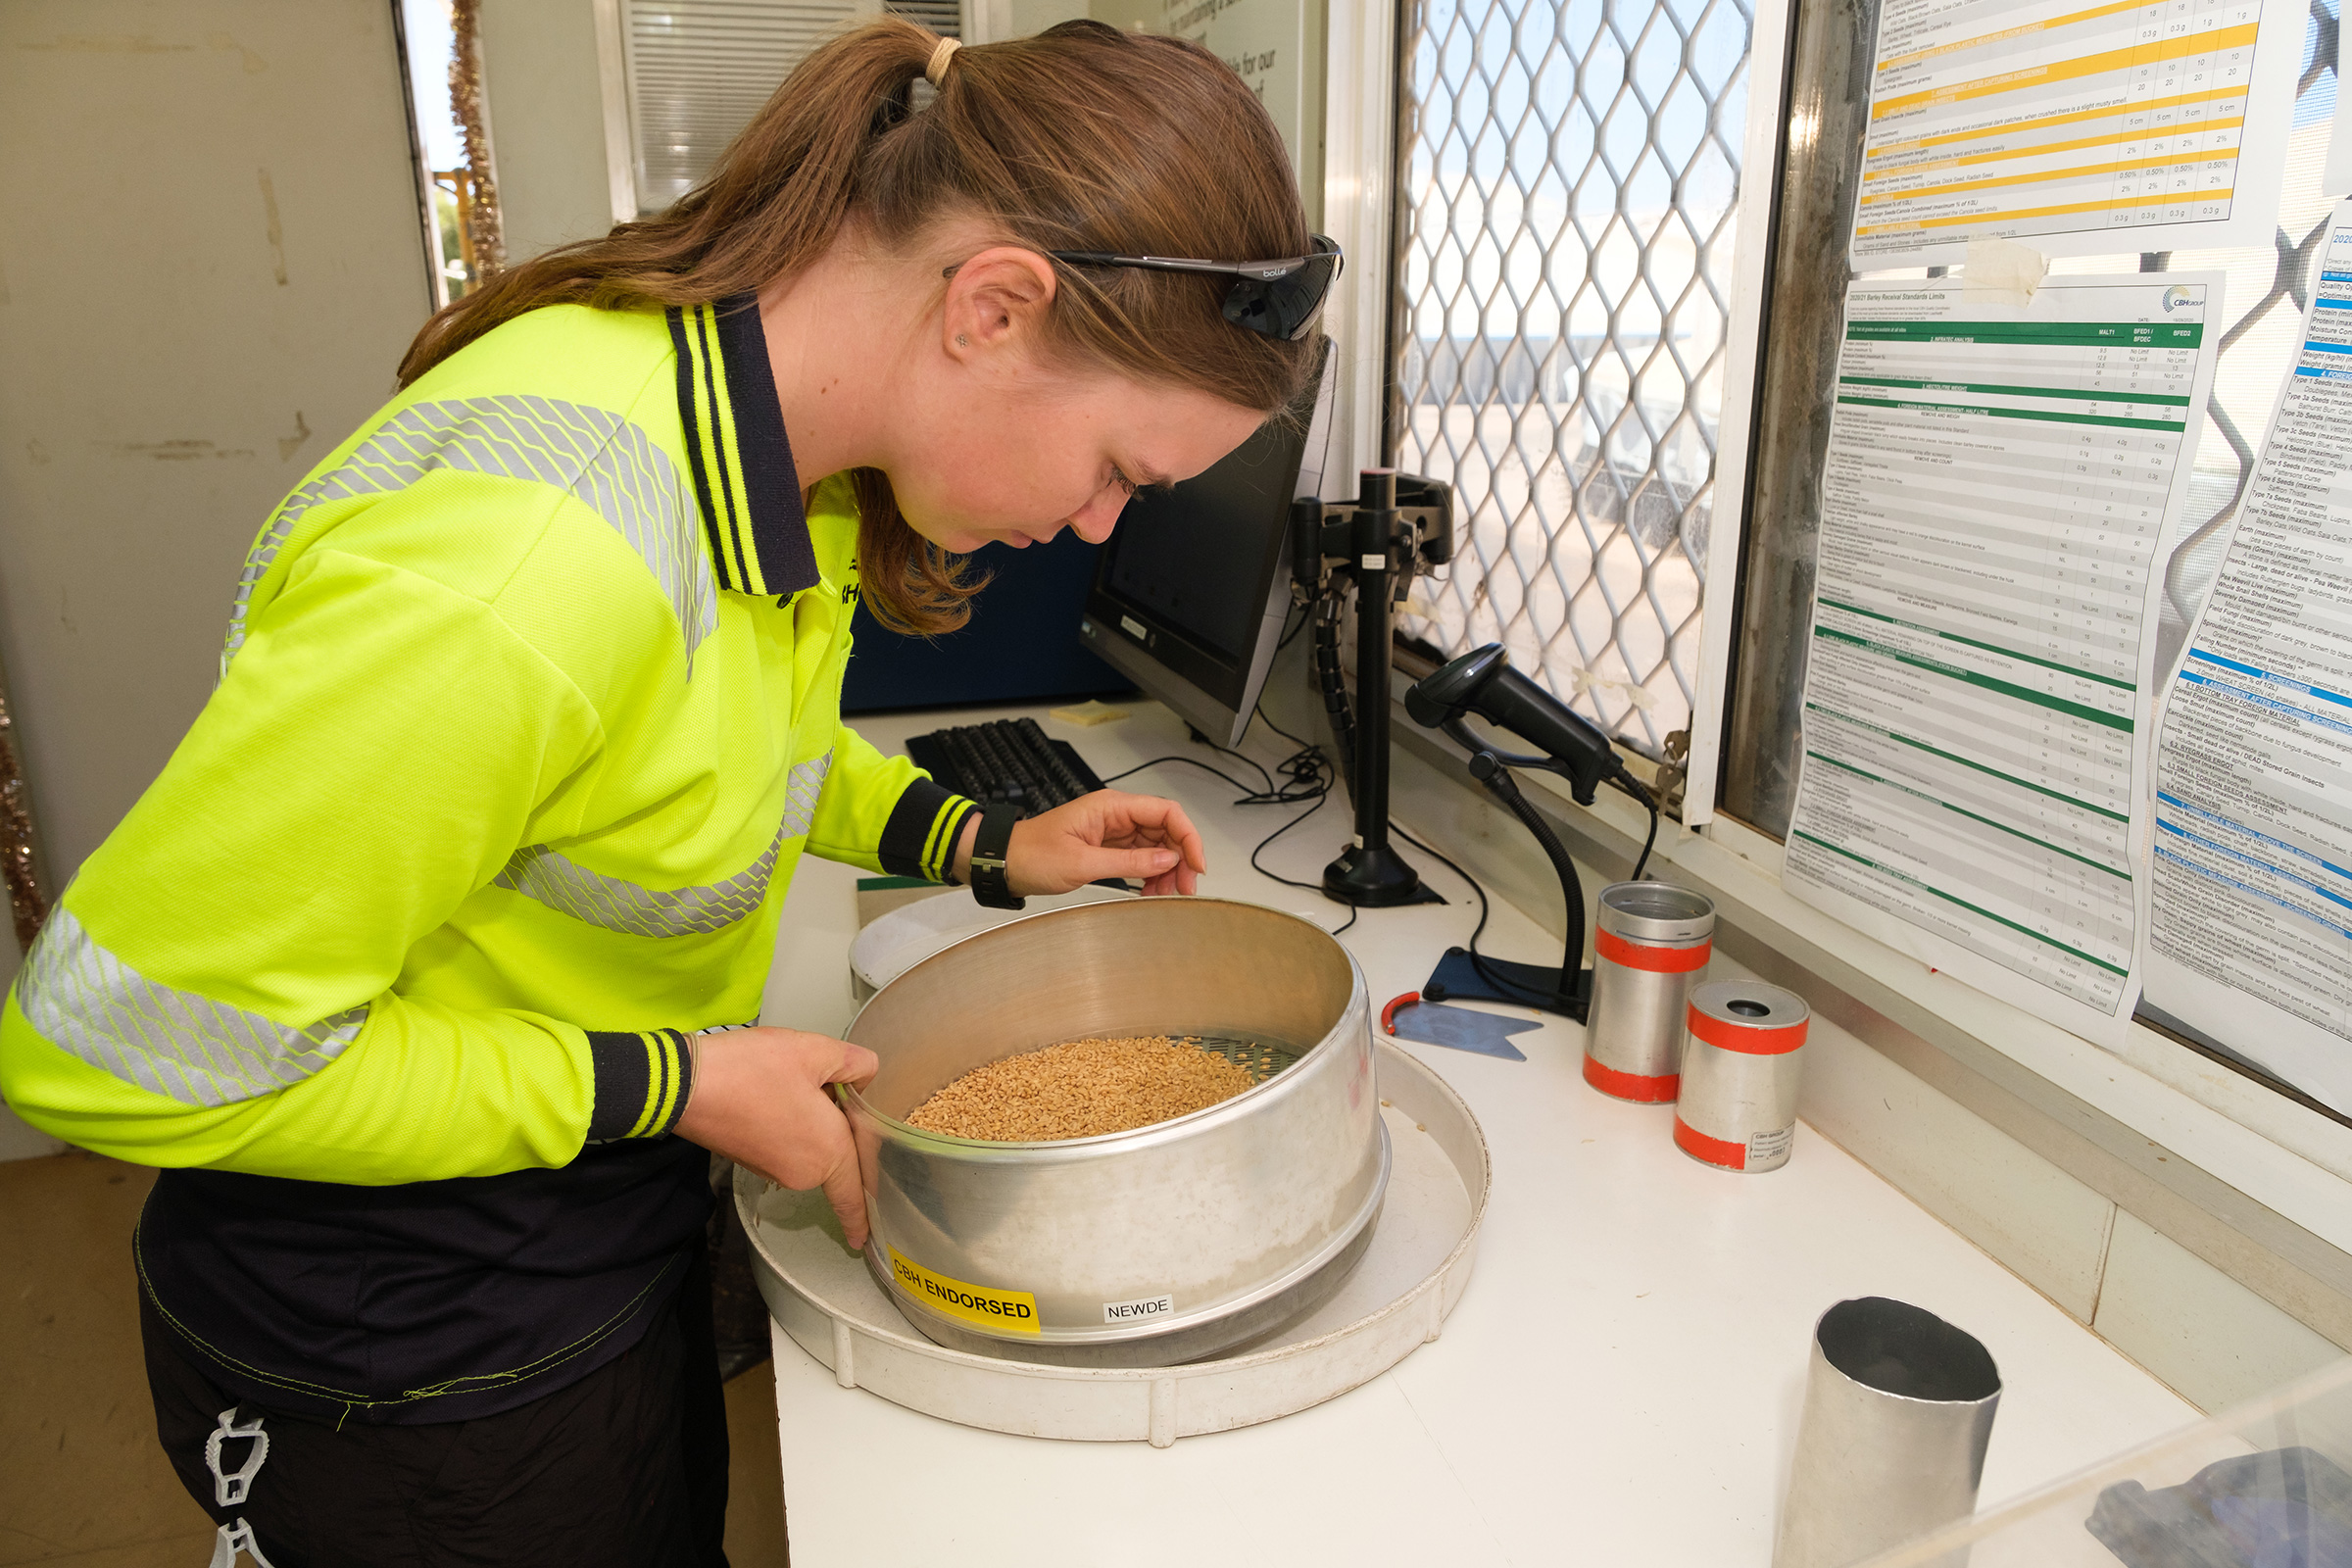 A girl leans over a silver bucket full of grain inspecting it